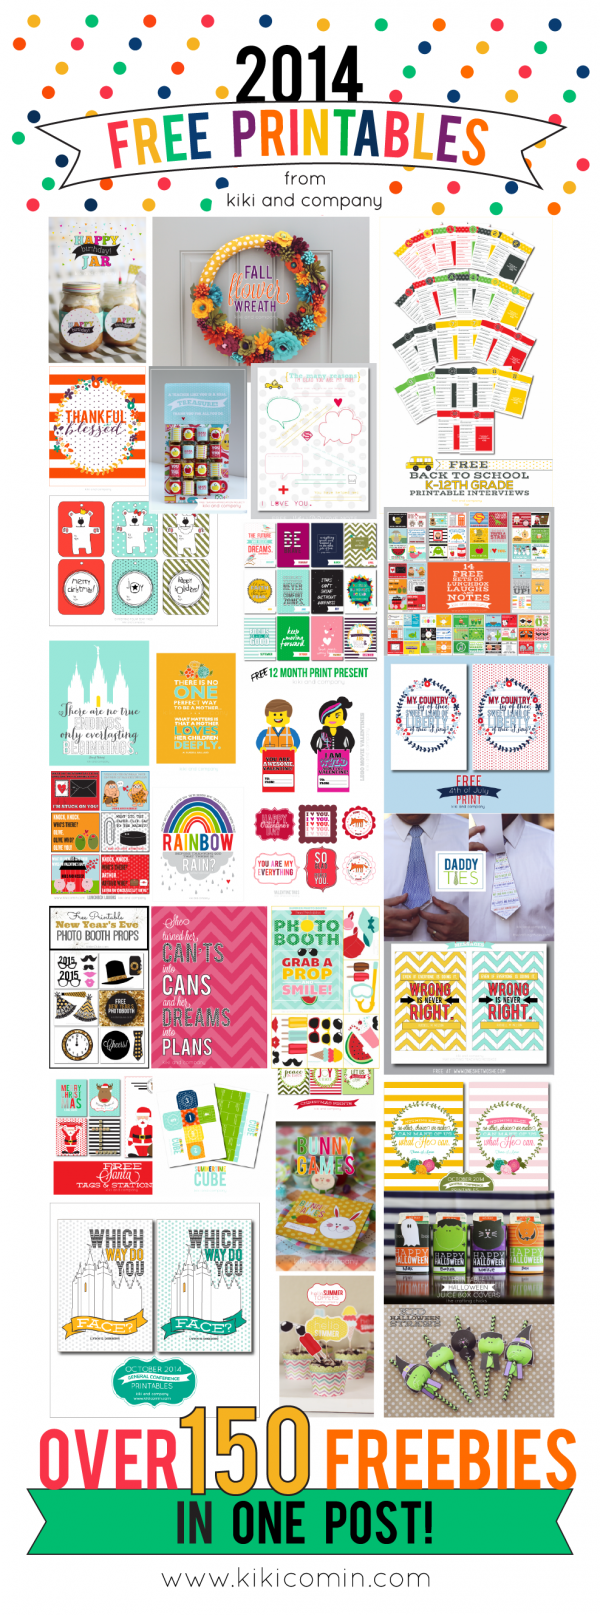 2014 Free Printables from Kiki and Company. Over 150 free printables in one post!